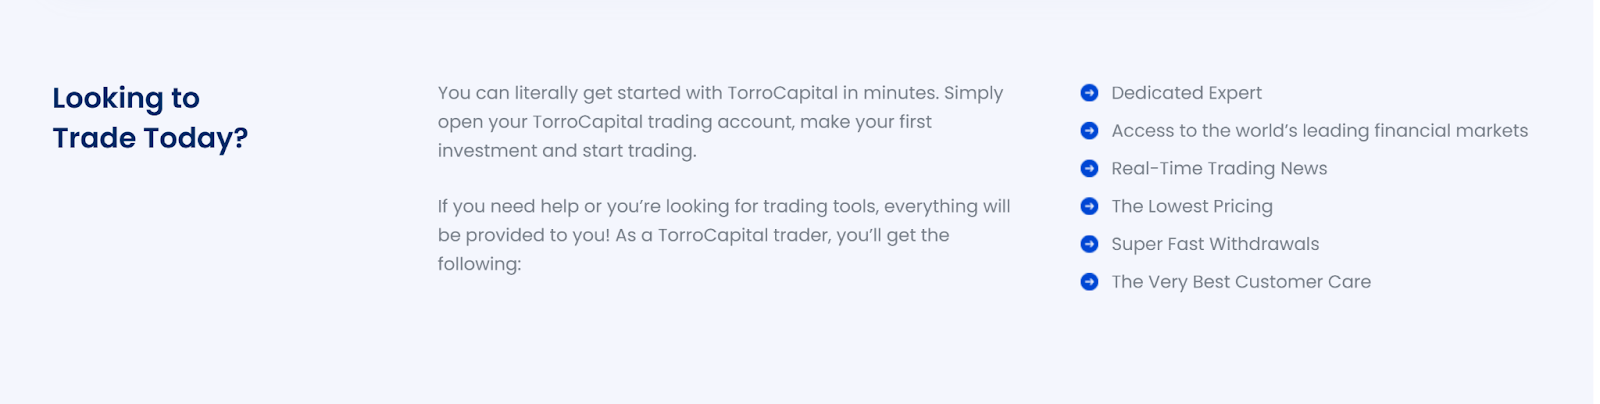 TorroCapital Com Review Gives Insights Of The Trading Platform